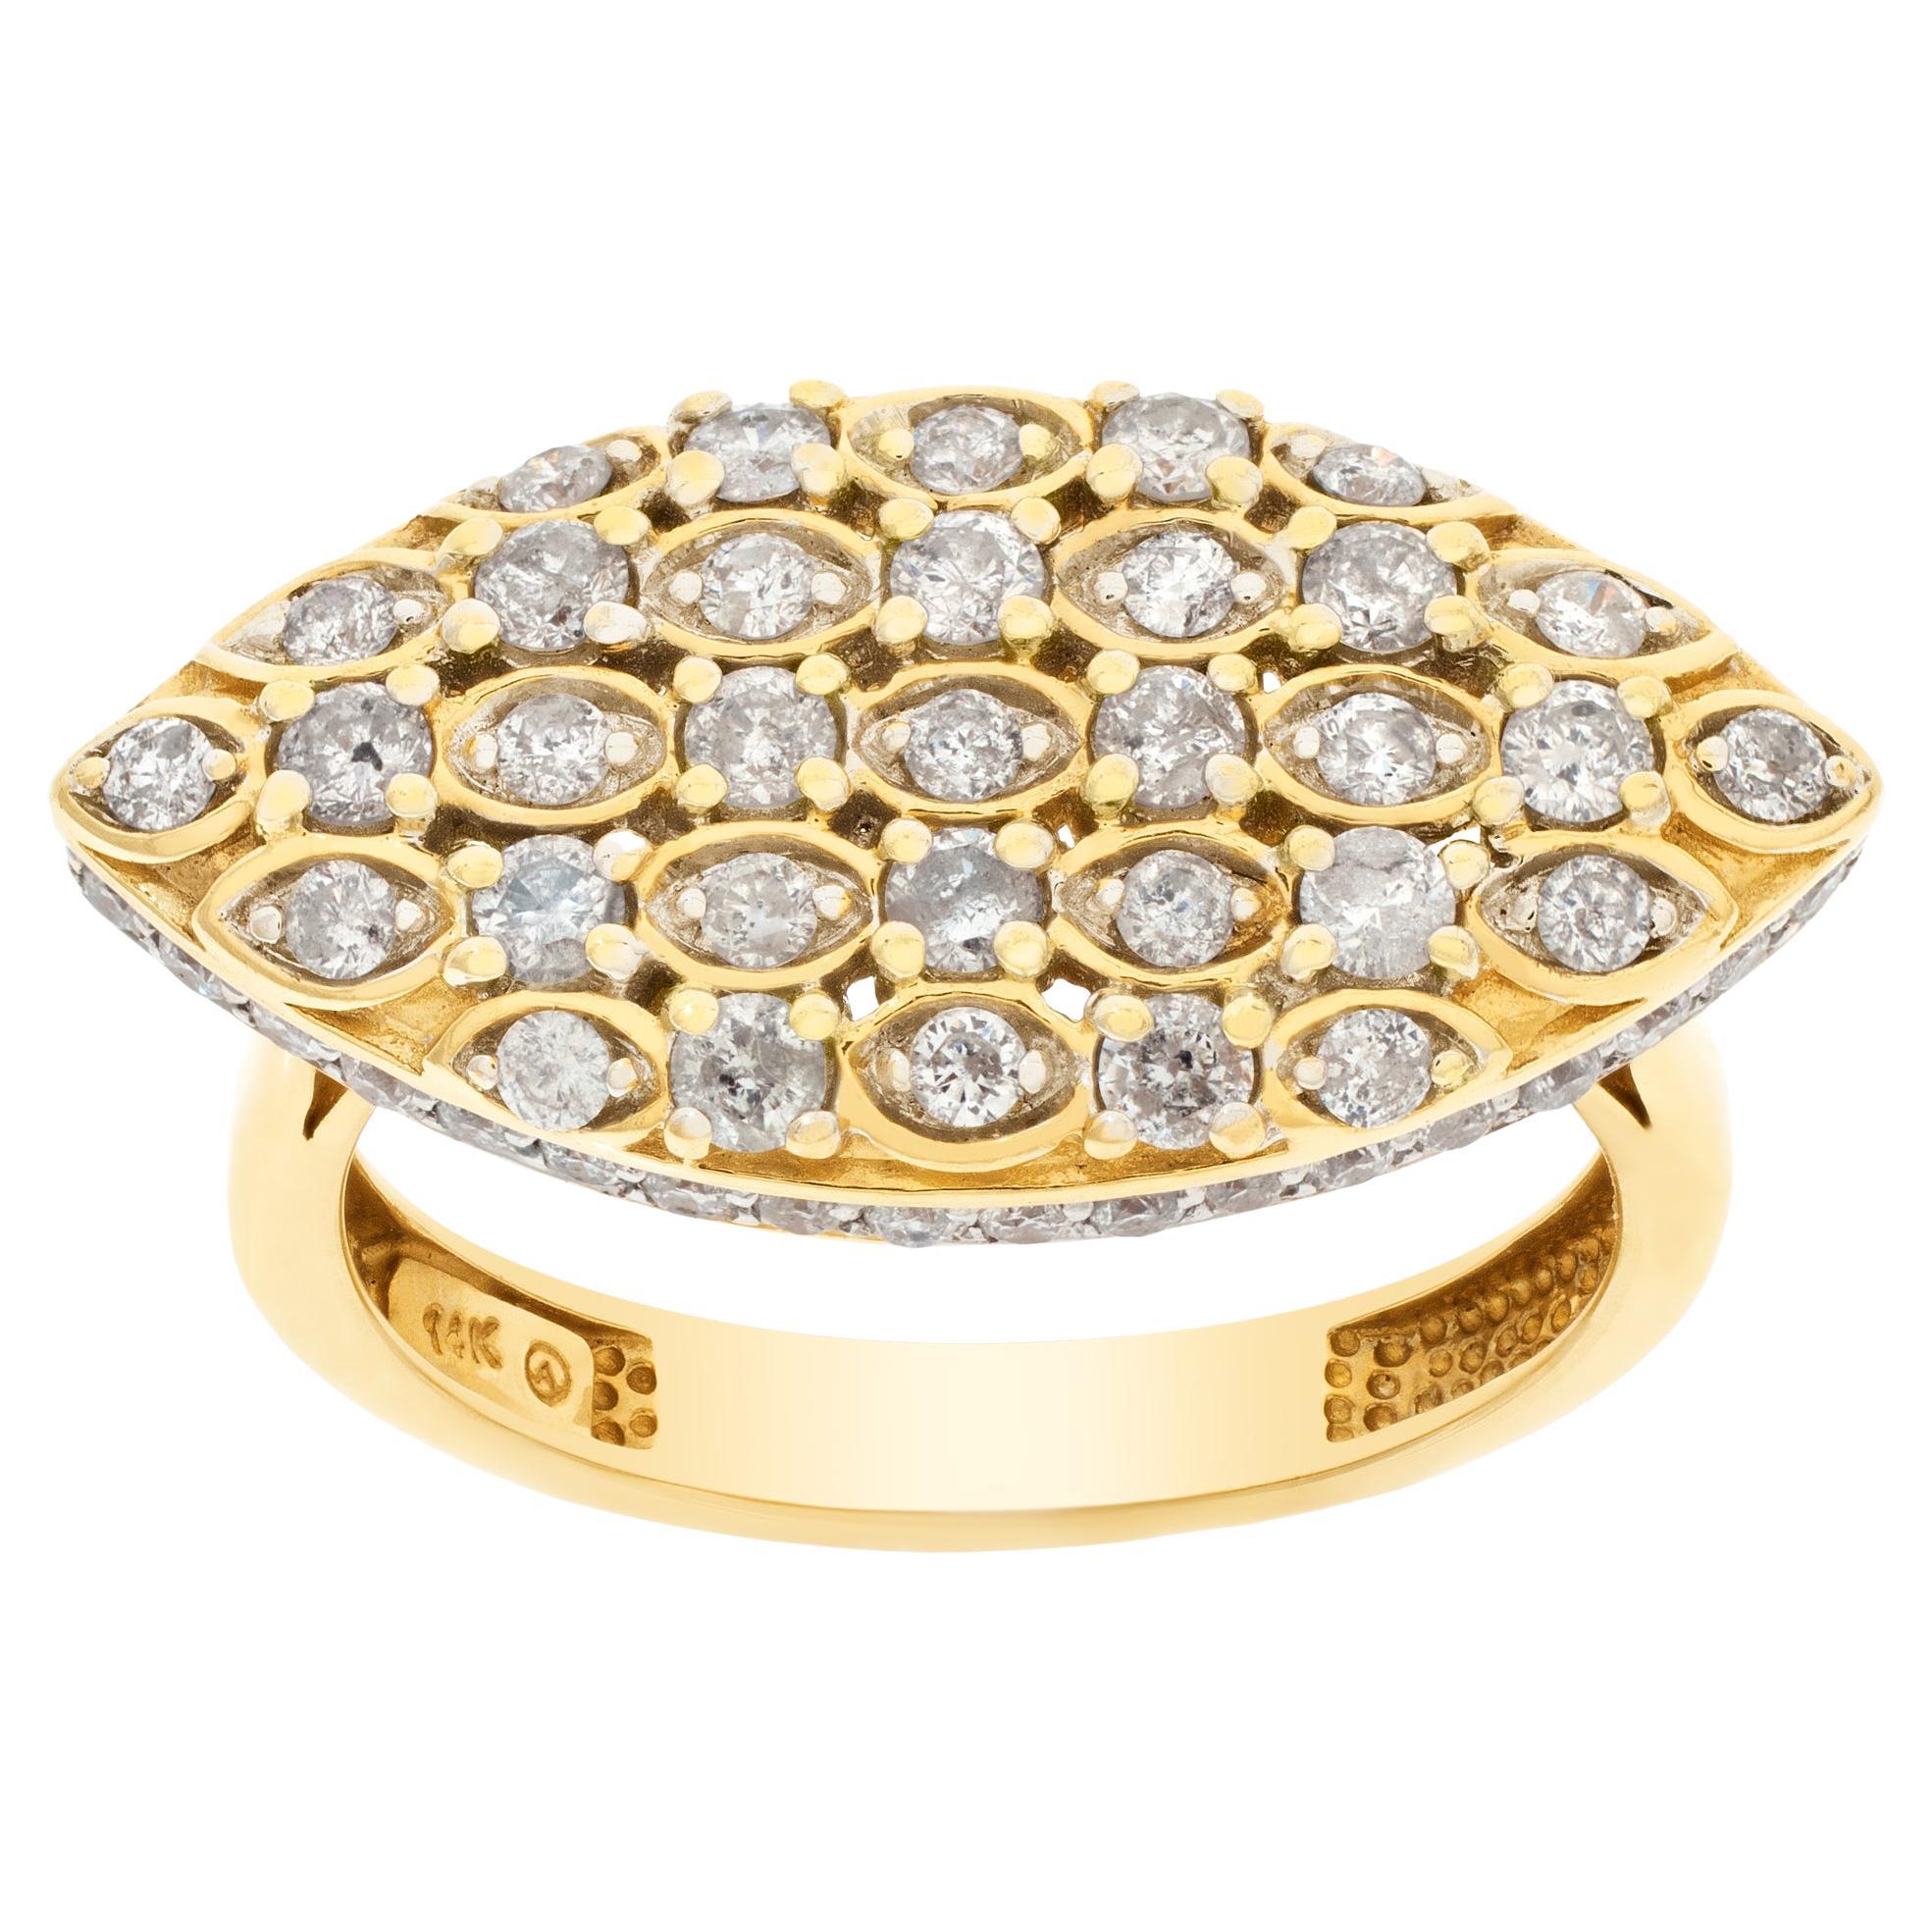 Oval Diamond ring in 14k yellow gold. 0.93 carats in pave set diamonds.  For Sale